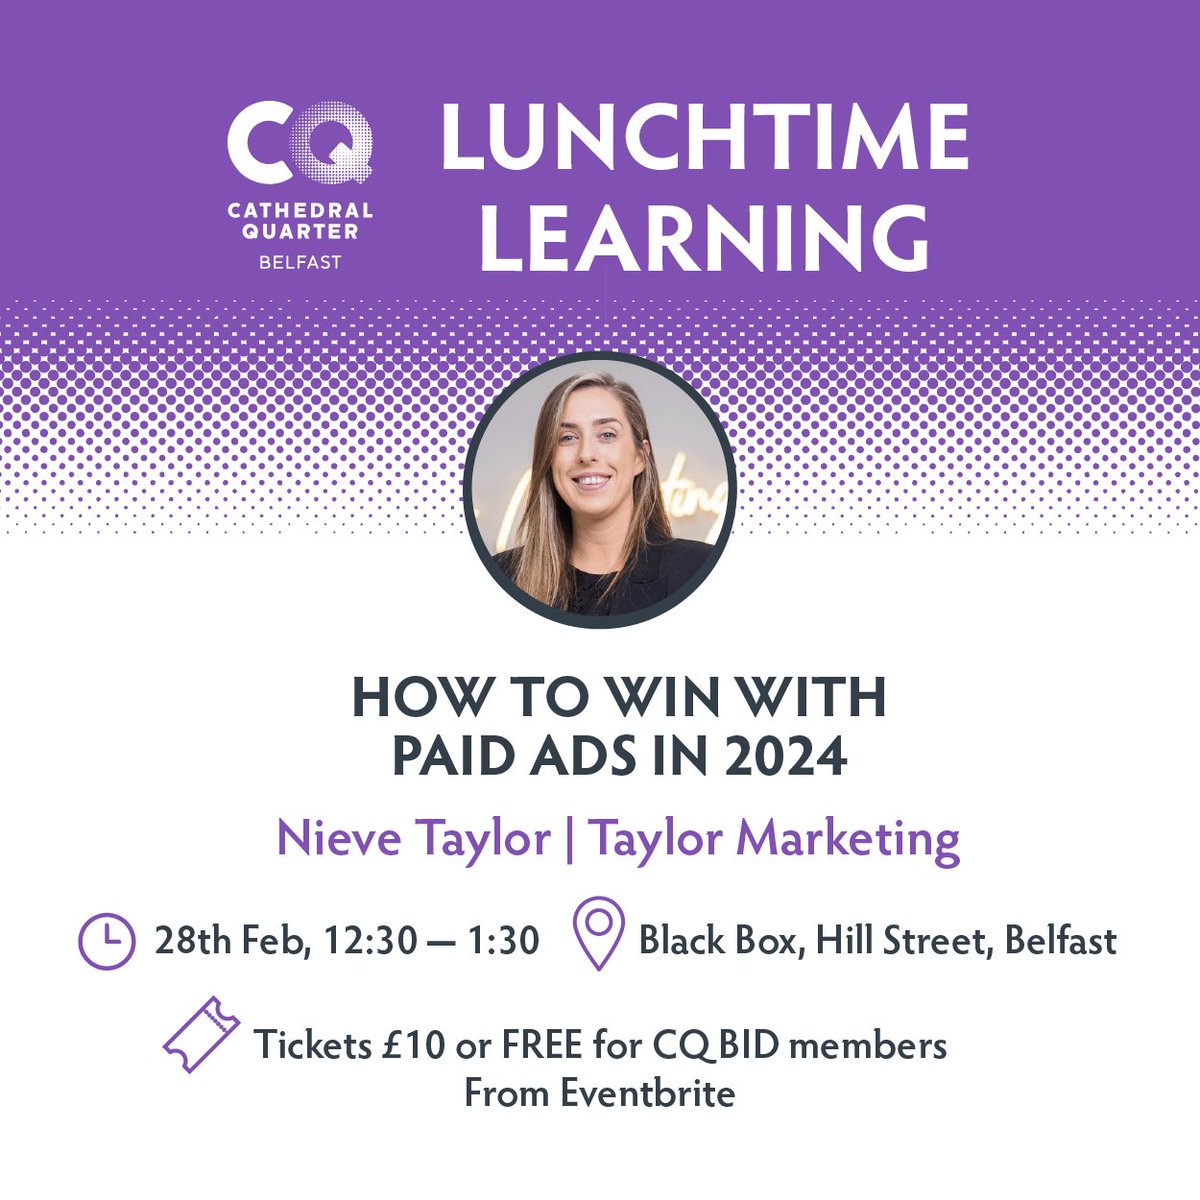 Are you looking to up your social ad game? Don't miss the next Lunchtime Learning at The Black Box with social ads specialist Nieve Taylor 🗓 Wednesday 28th February 2024 ⏰ 12.30-1.30pm 📍 Black Box Belfast 🔗 eventbrite.com/e/829839601587